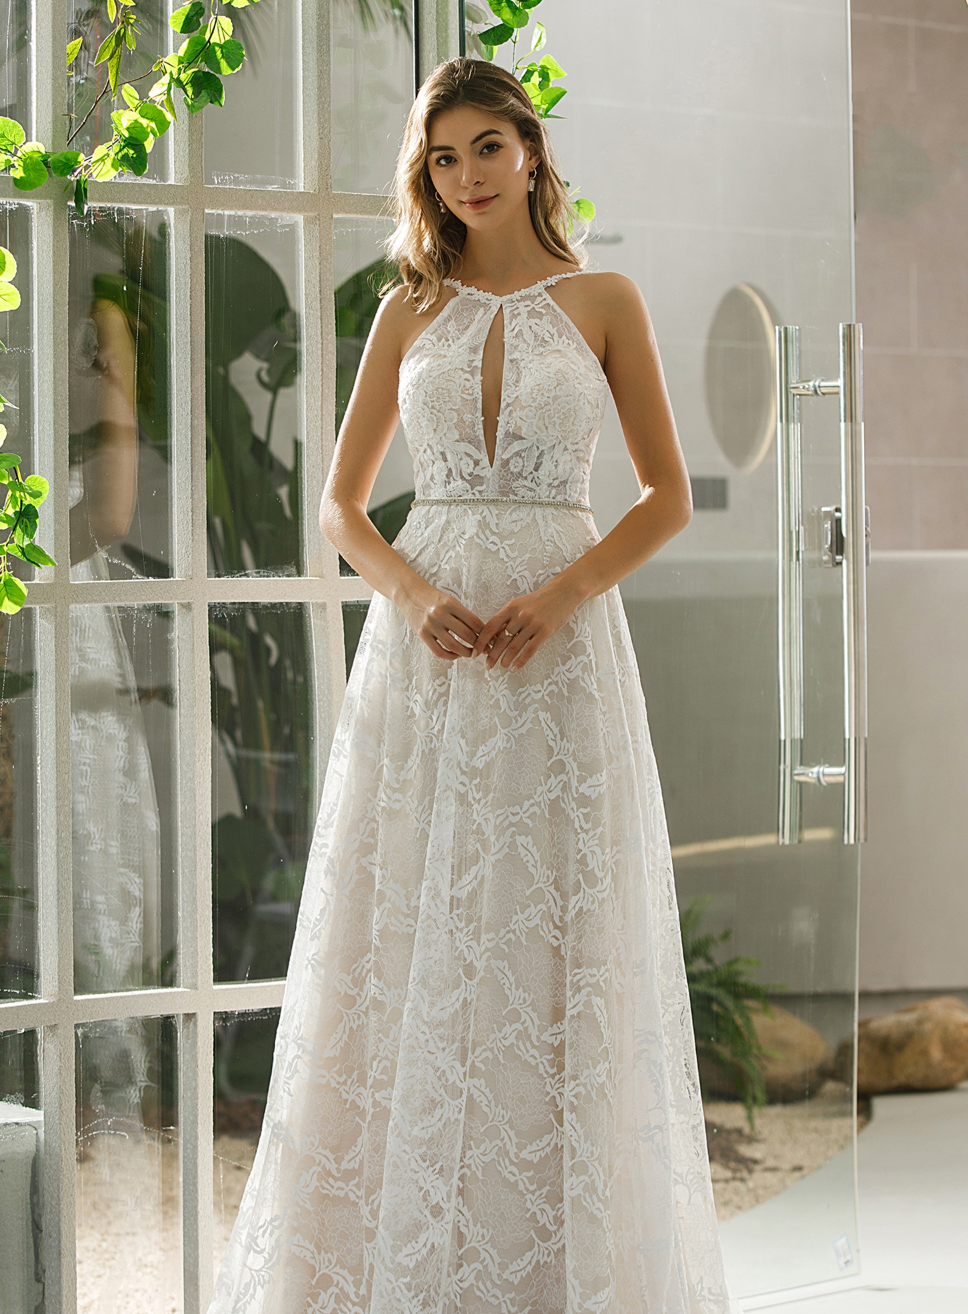 Halter Neckline Lace Bridal Gown With Crisscross Back